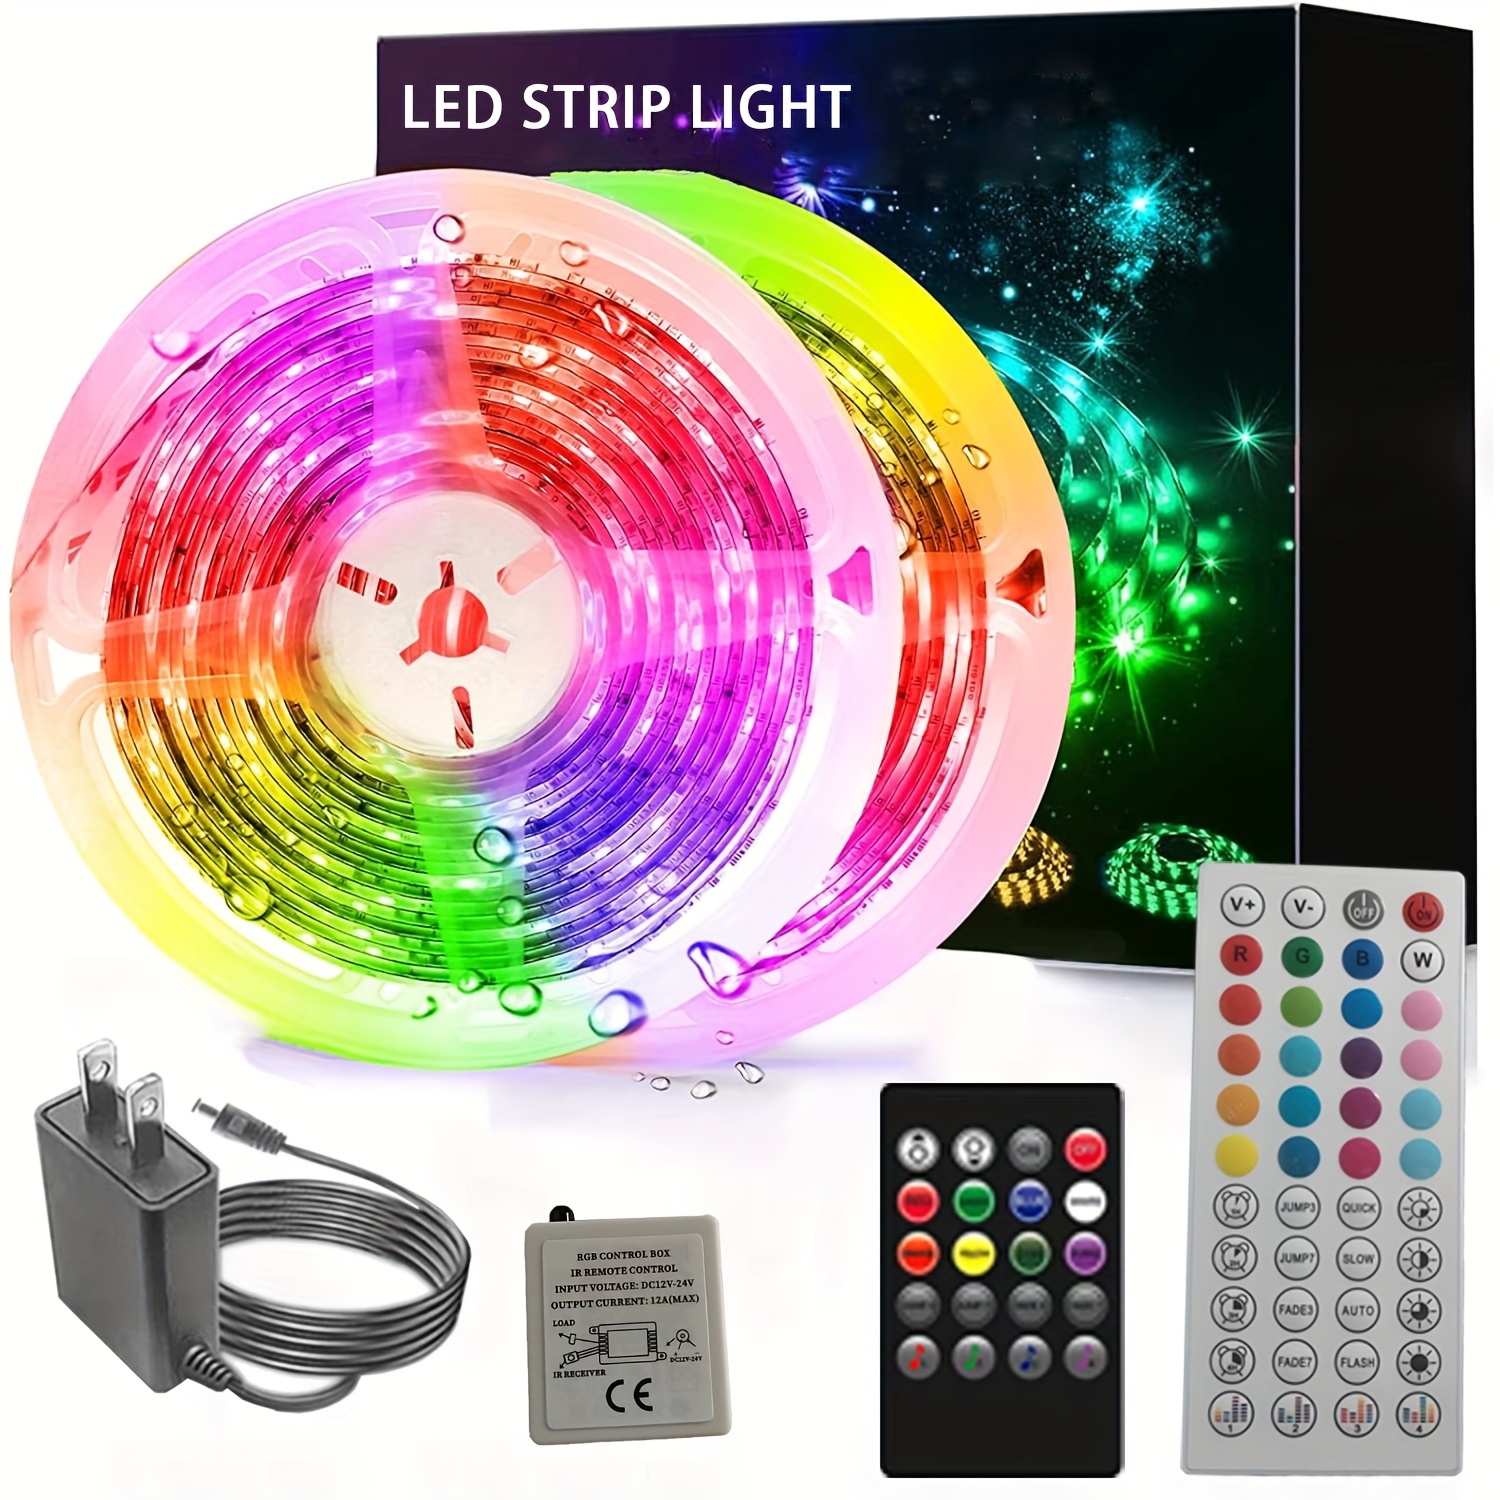 Avatar Controls Multicolor Smart LED Light Strip 16.4ft with IR Remote